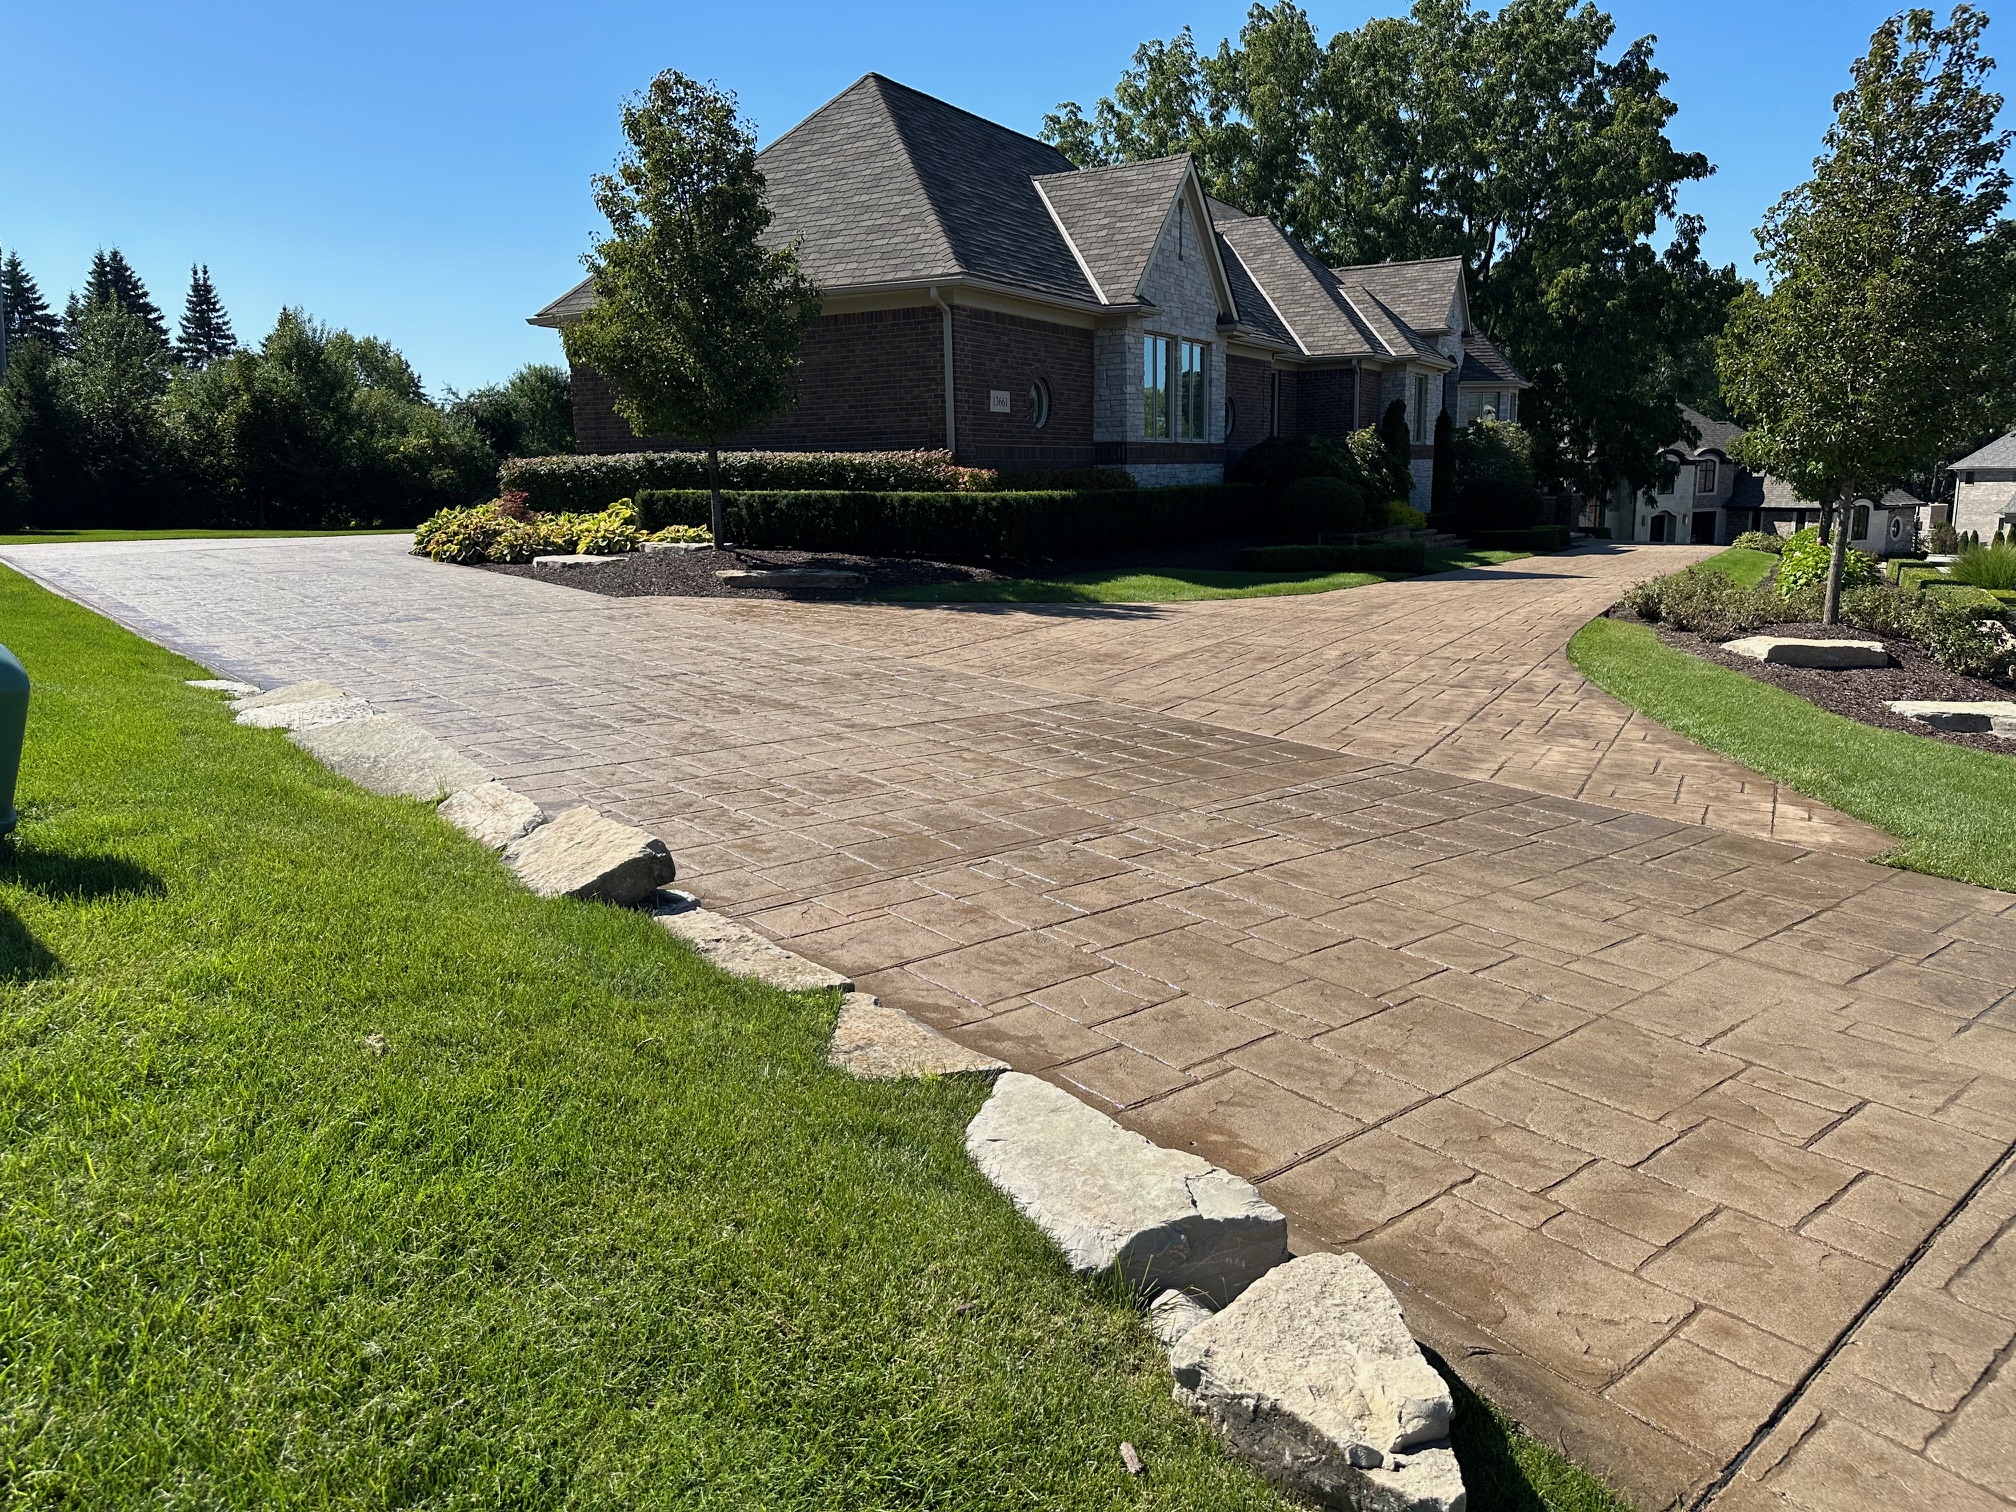 sealed driveway after driveway cleaning in Washington township